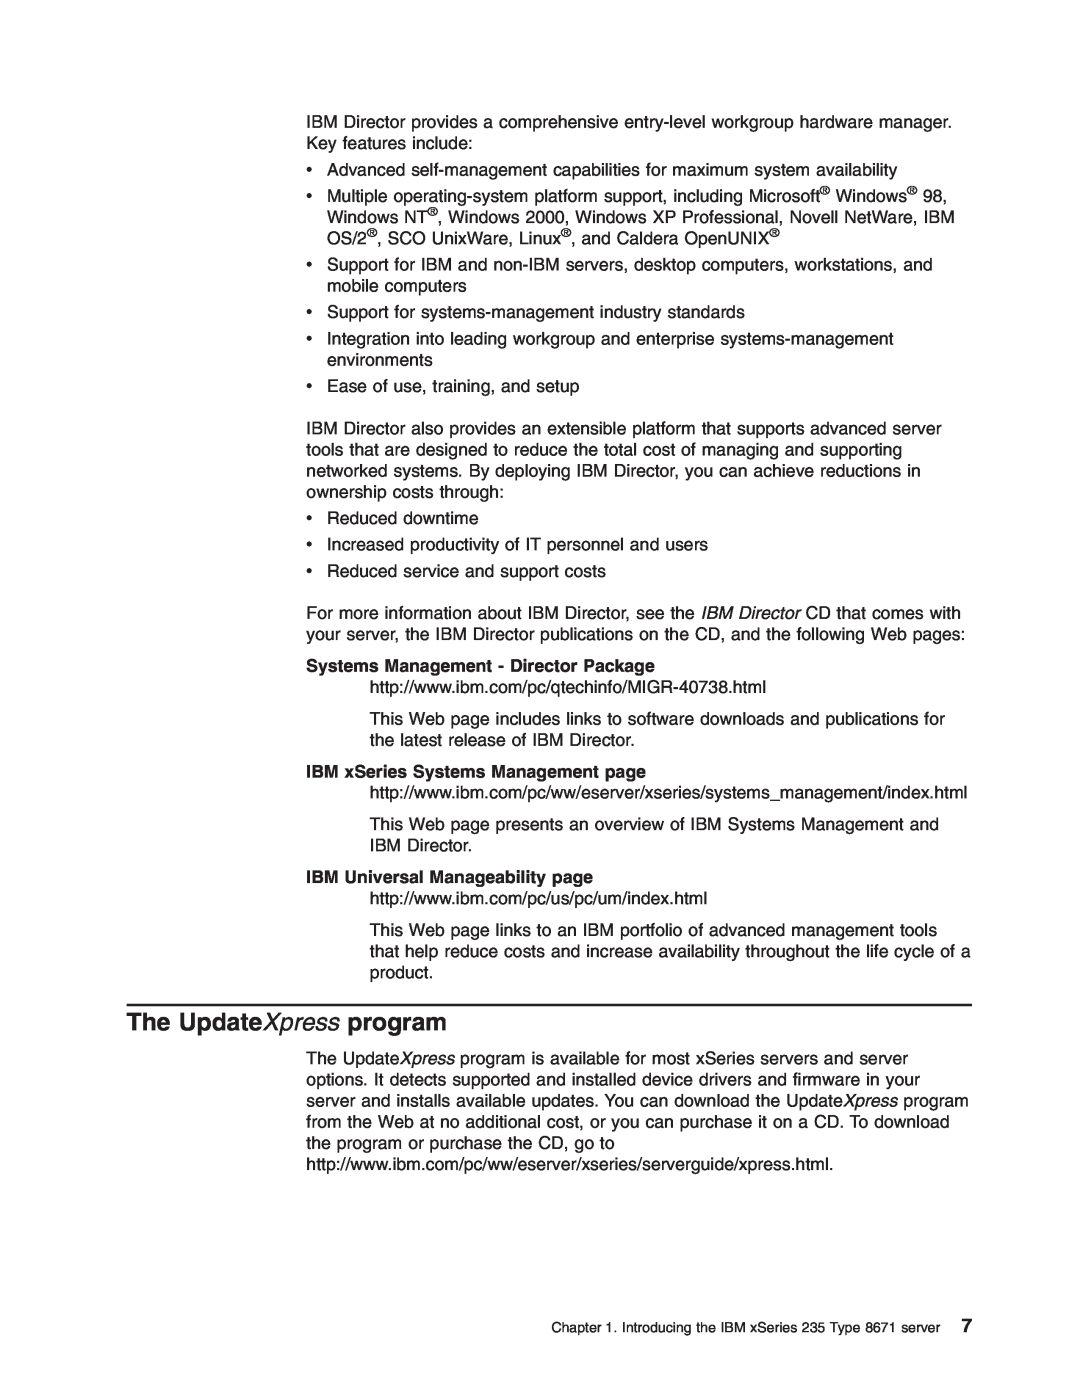 IBM xSeries 235 manual The UpdateXpress program, Systems Management - Director Package, IBM Universal Manageability page 